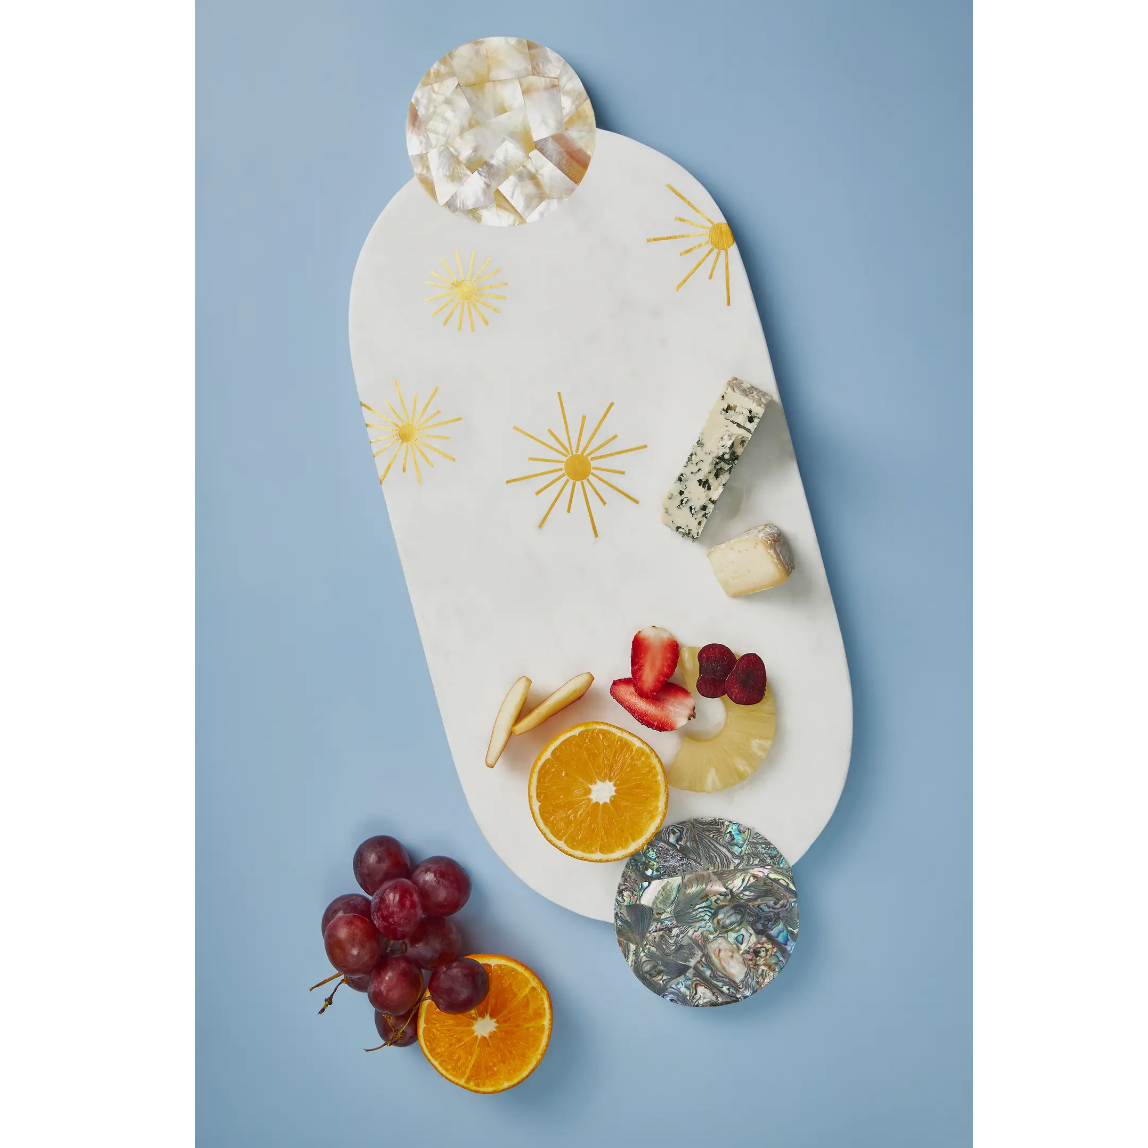 MONTENEGRO MARBLE CHEESE BOARD